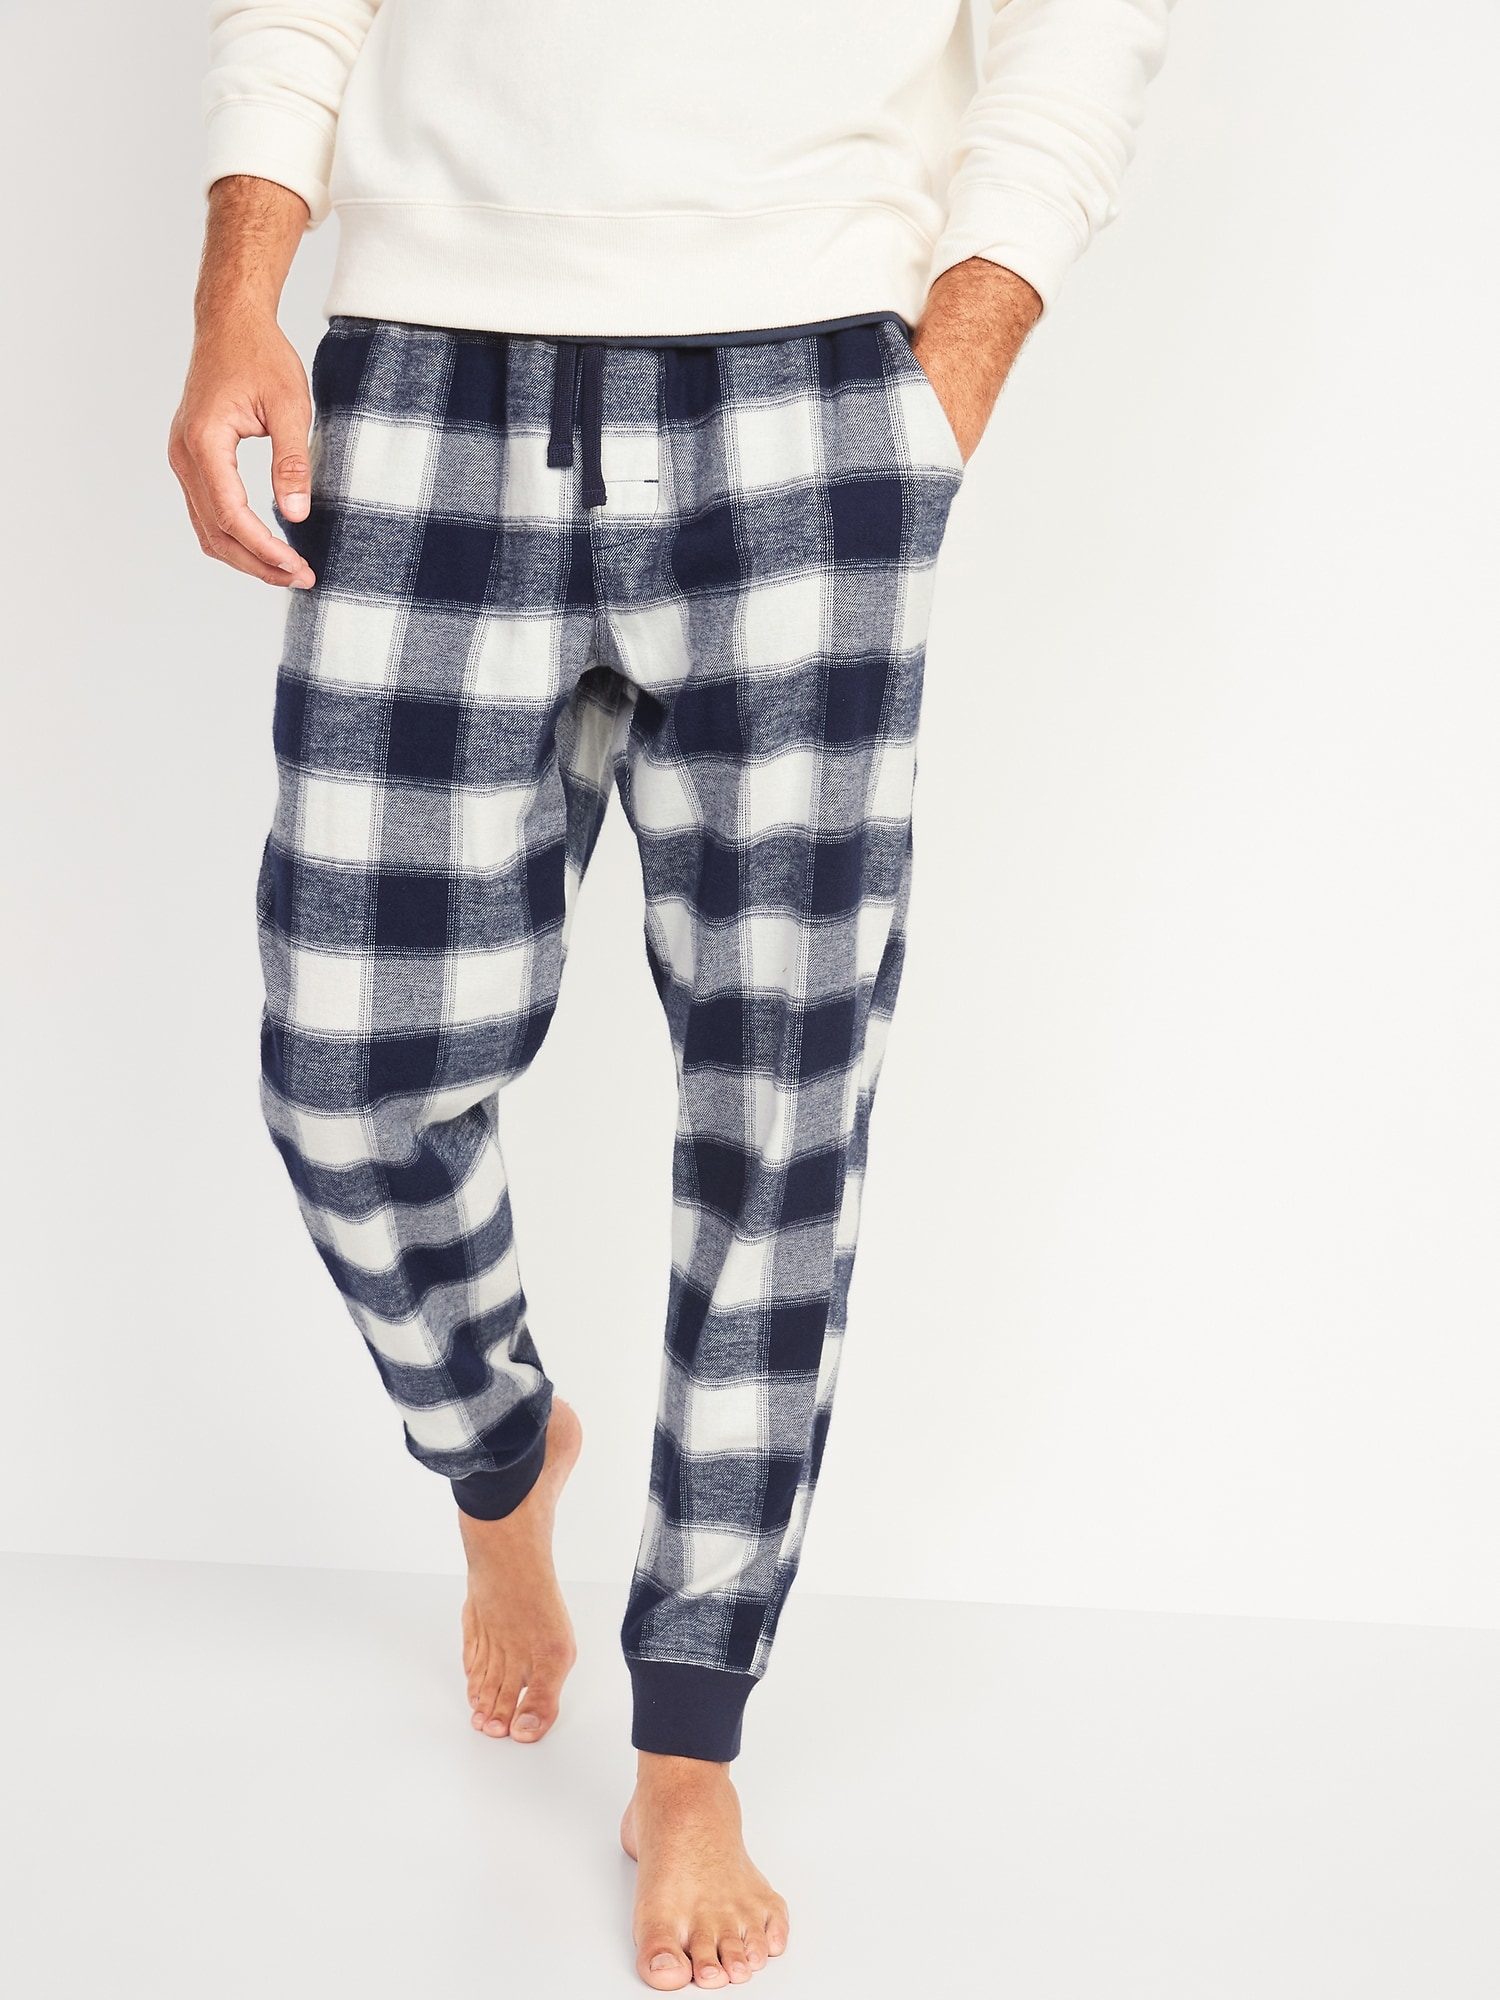 Old Navy Matching Plaid Flannel Jogger Pajama Pants for Men - ShopStyle